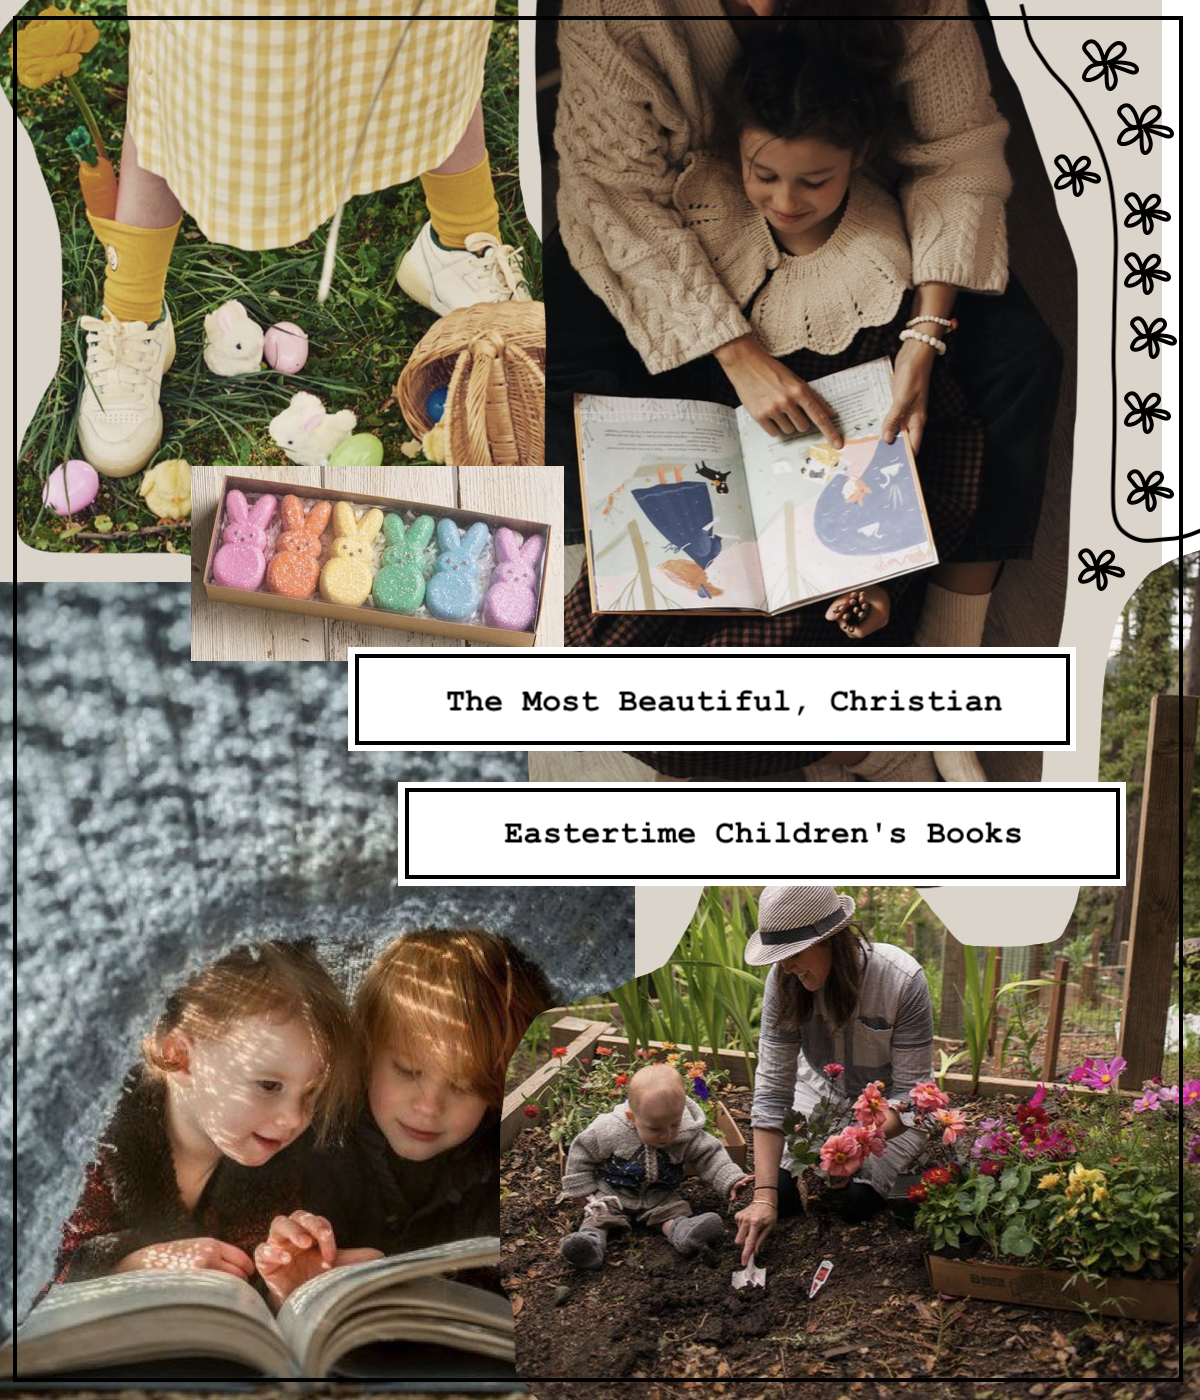 The Most Beautiful, Christian Eastertime Children’s Books